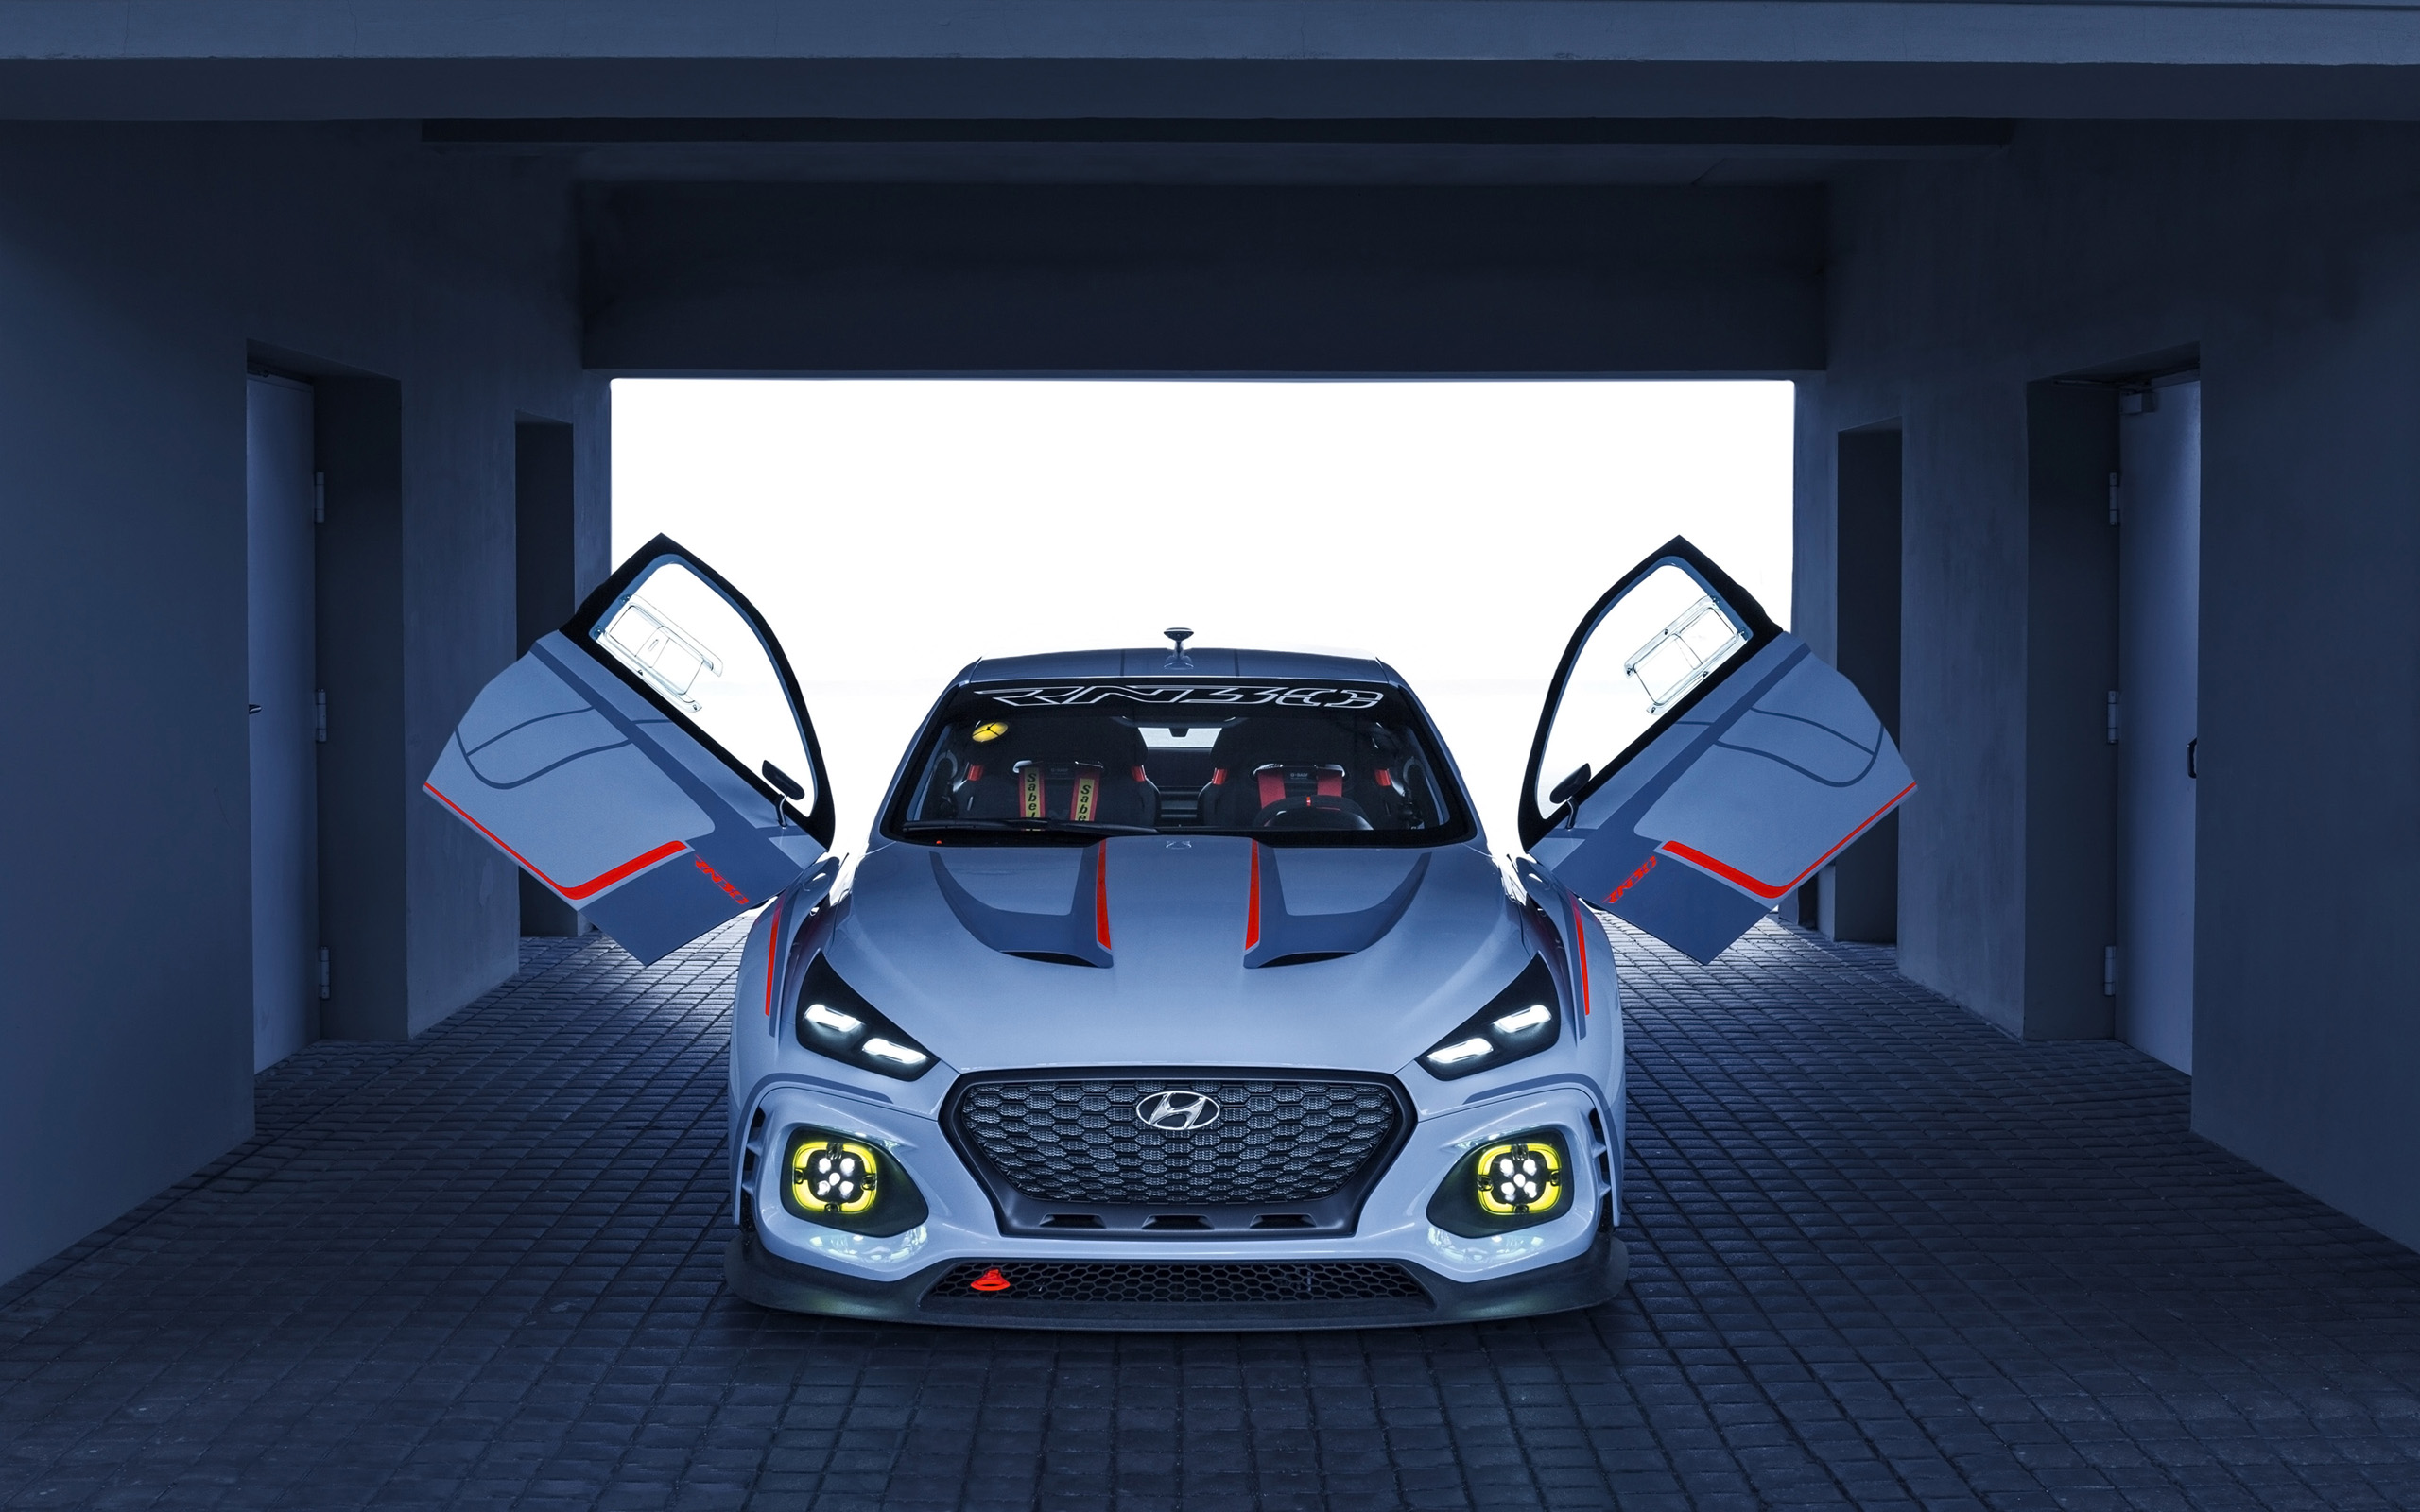 Hyundai k wallpapers for your desktop or mobile screen free and easy to download